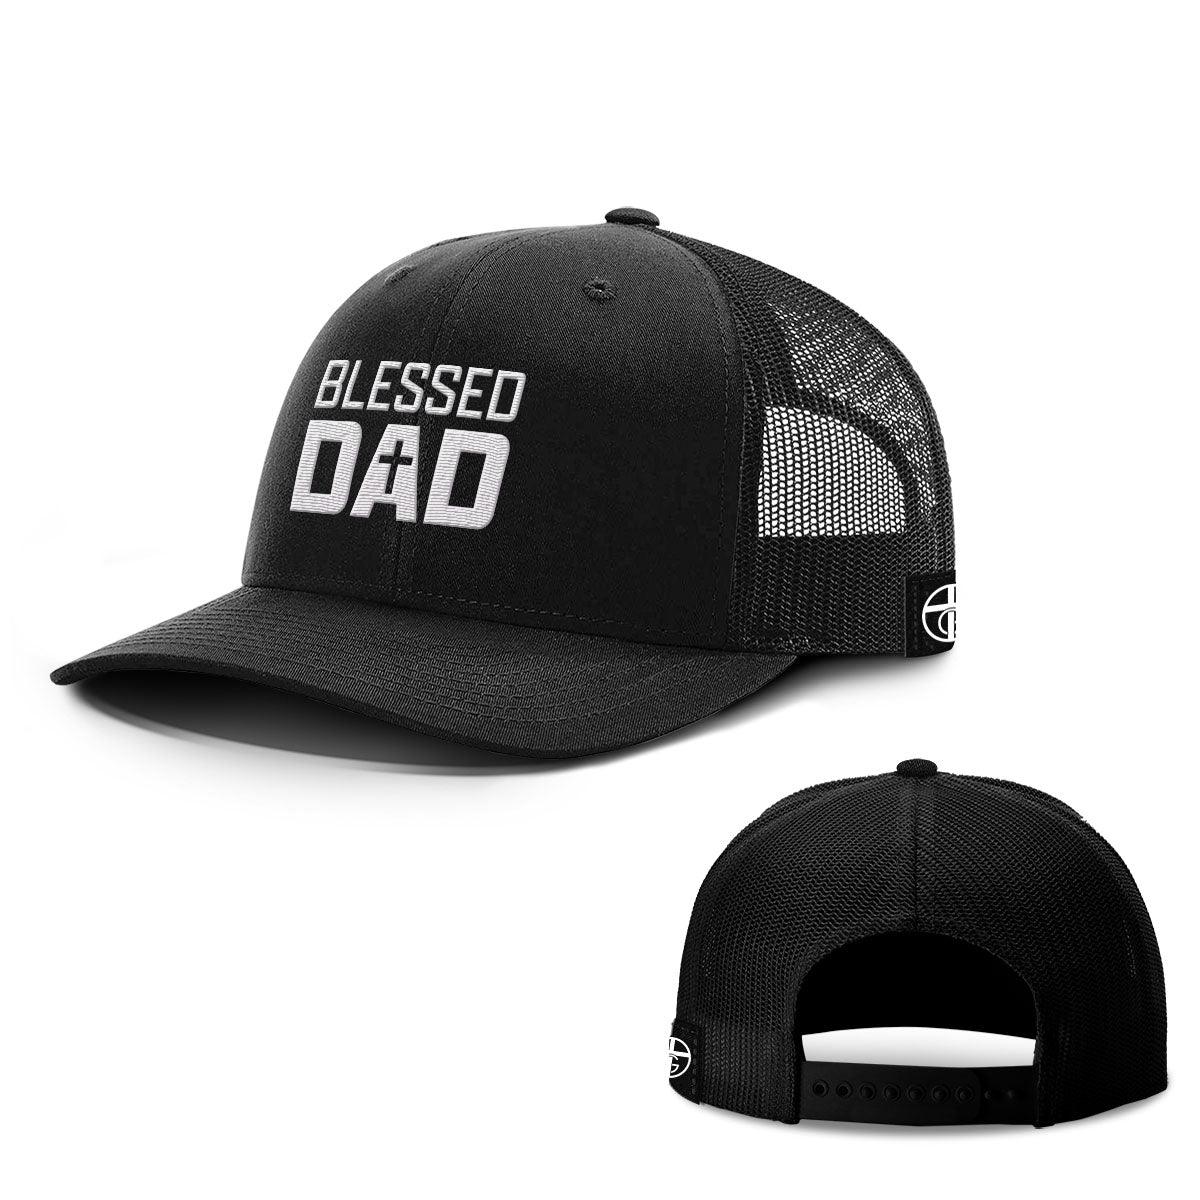 Blessed Dad Hats